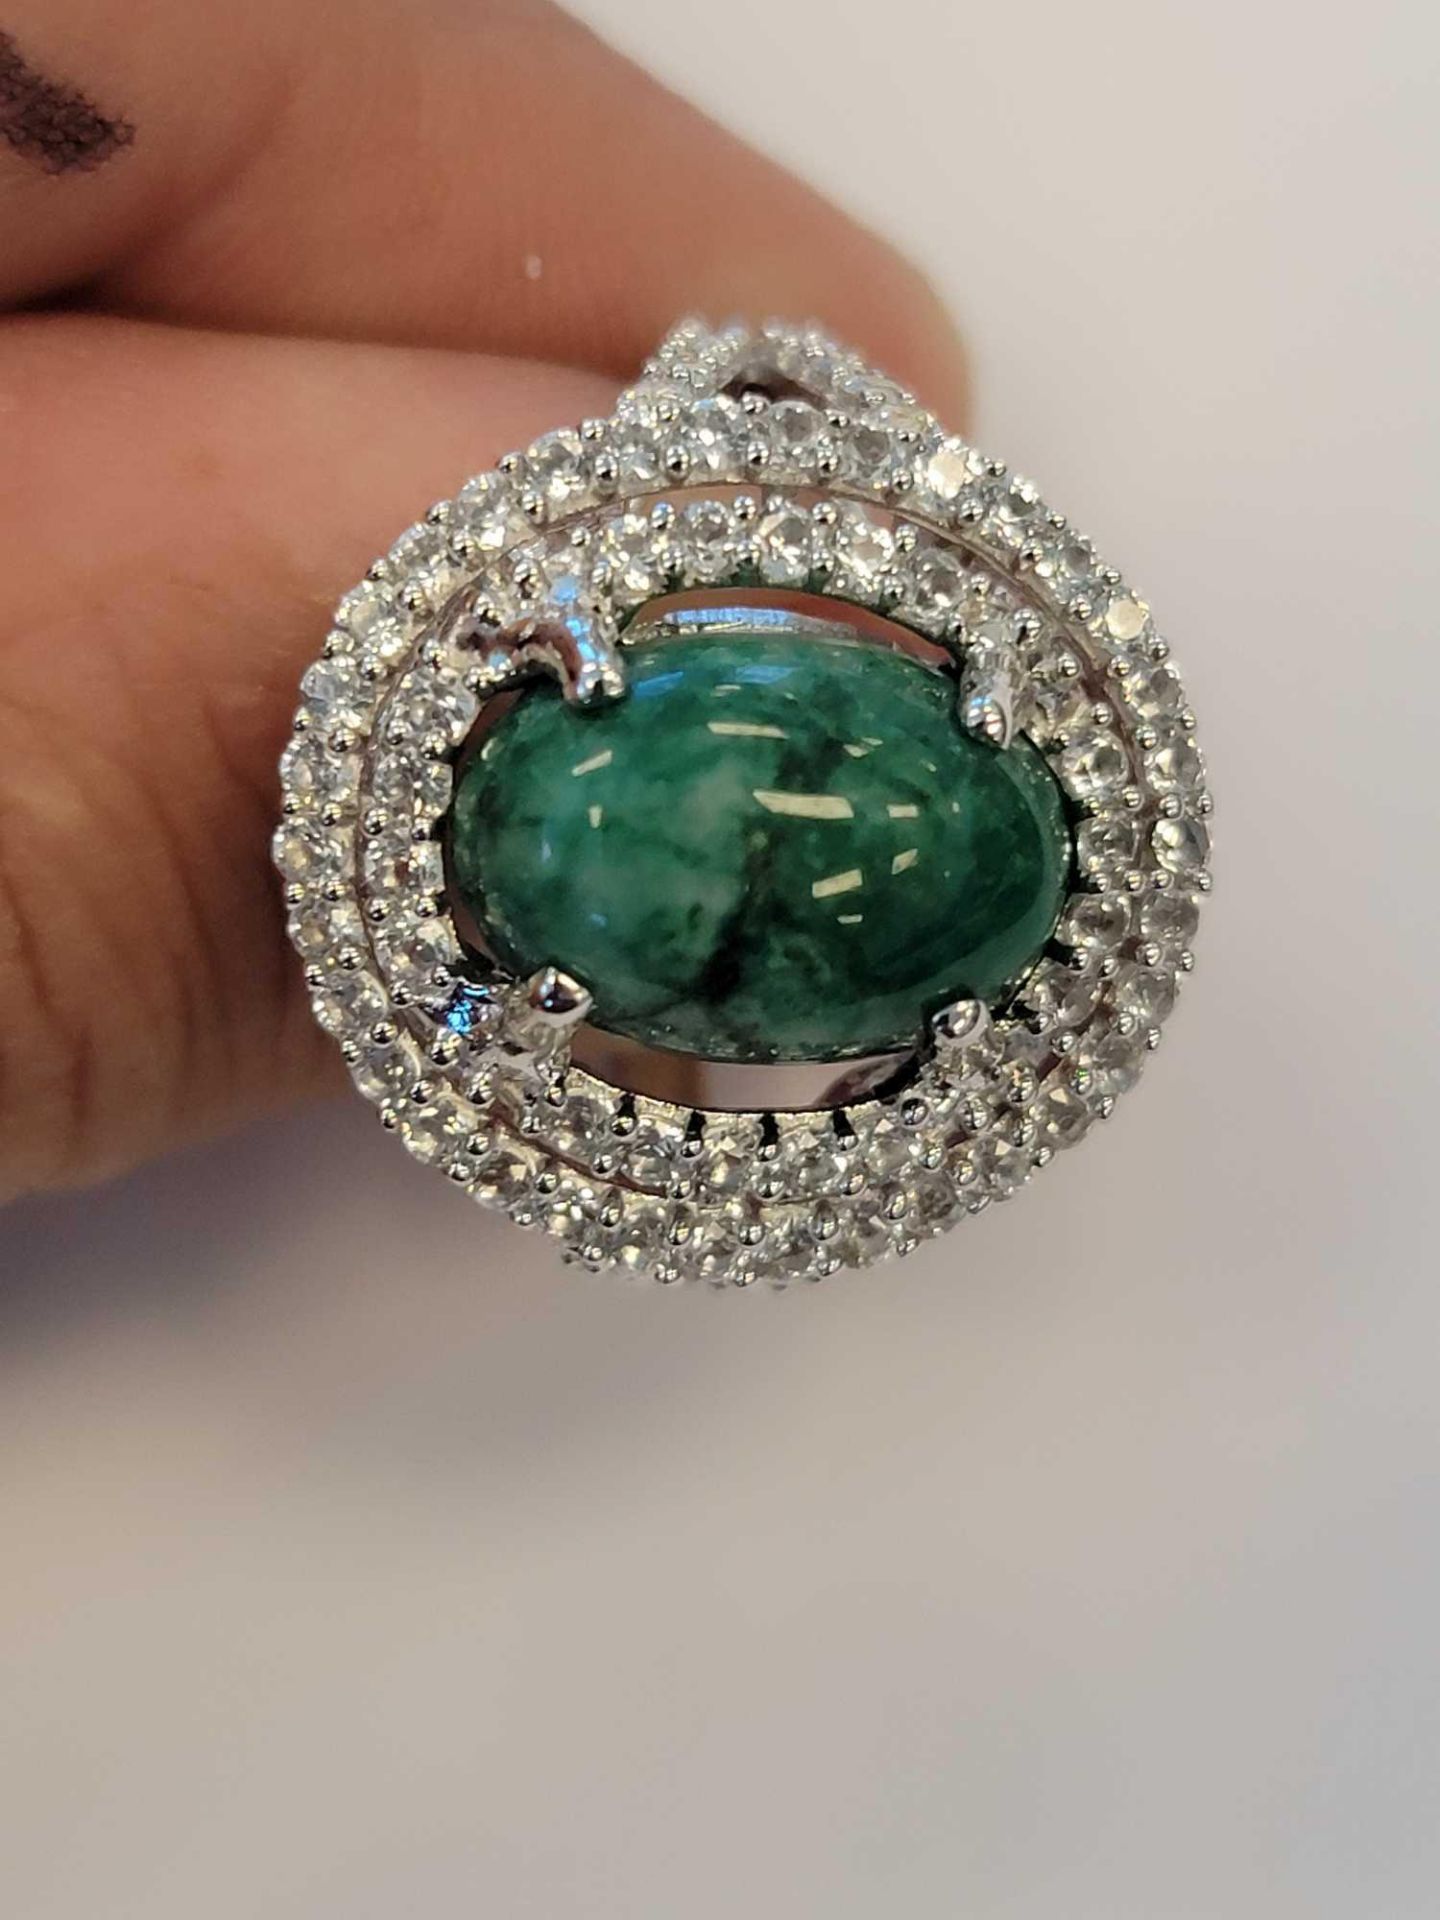 Dyed Green Beryl (emerald) 6.5 cts with white sapphire and sterling - Image 2 of 5